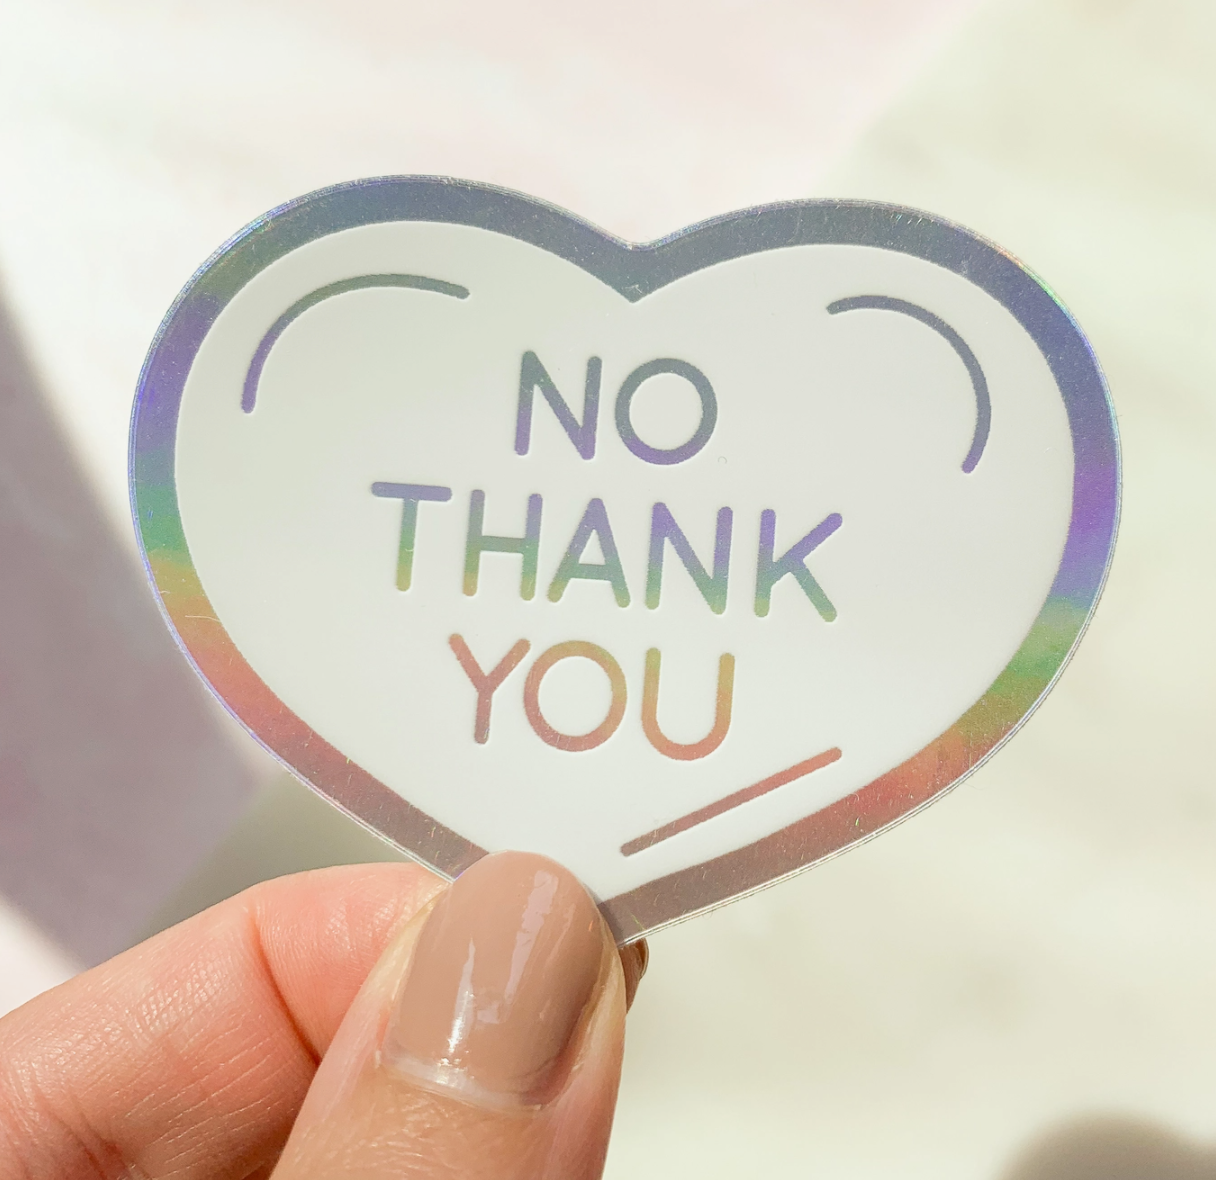 No Thank You Heart Sticker by One & Only Paper